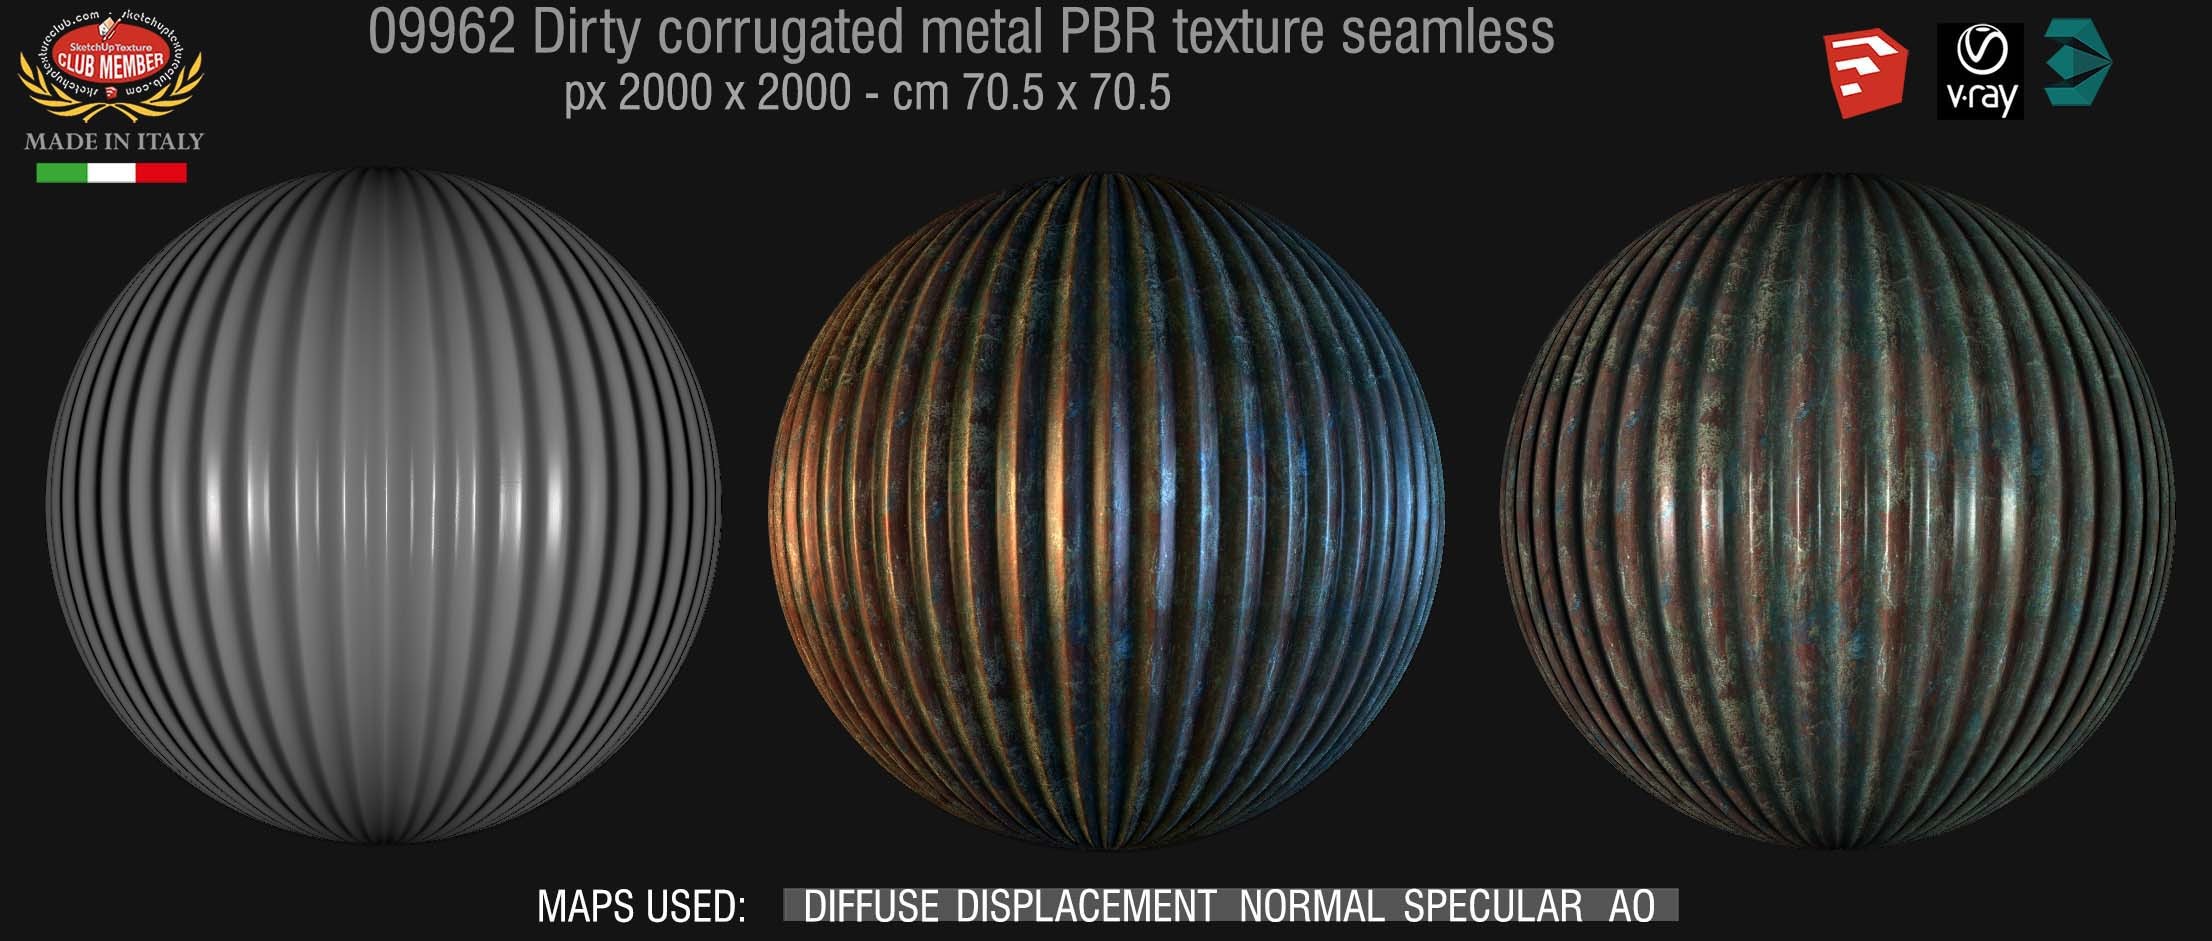 09962 Dirty corrugated metal PBR texture seamless DEMO